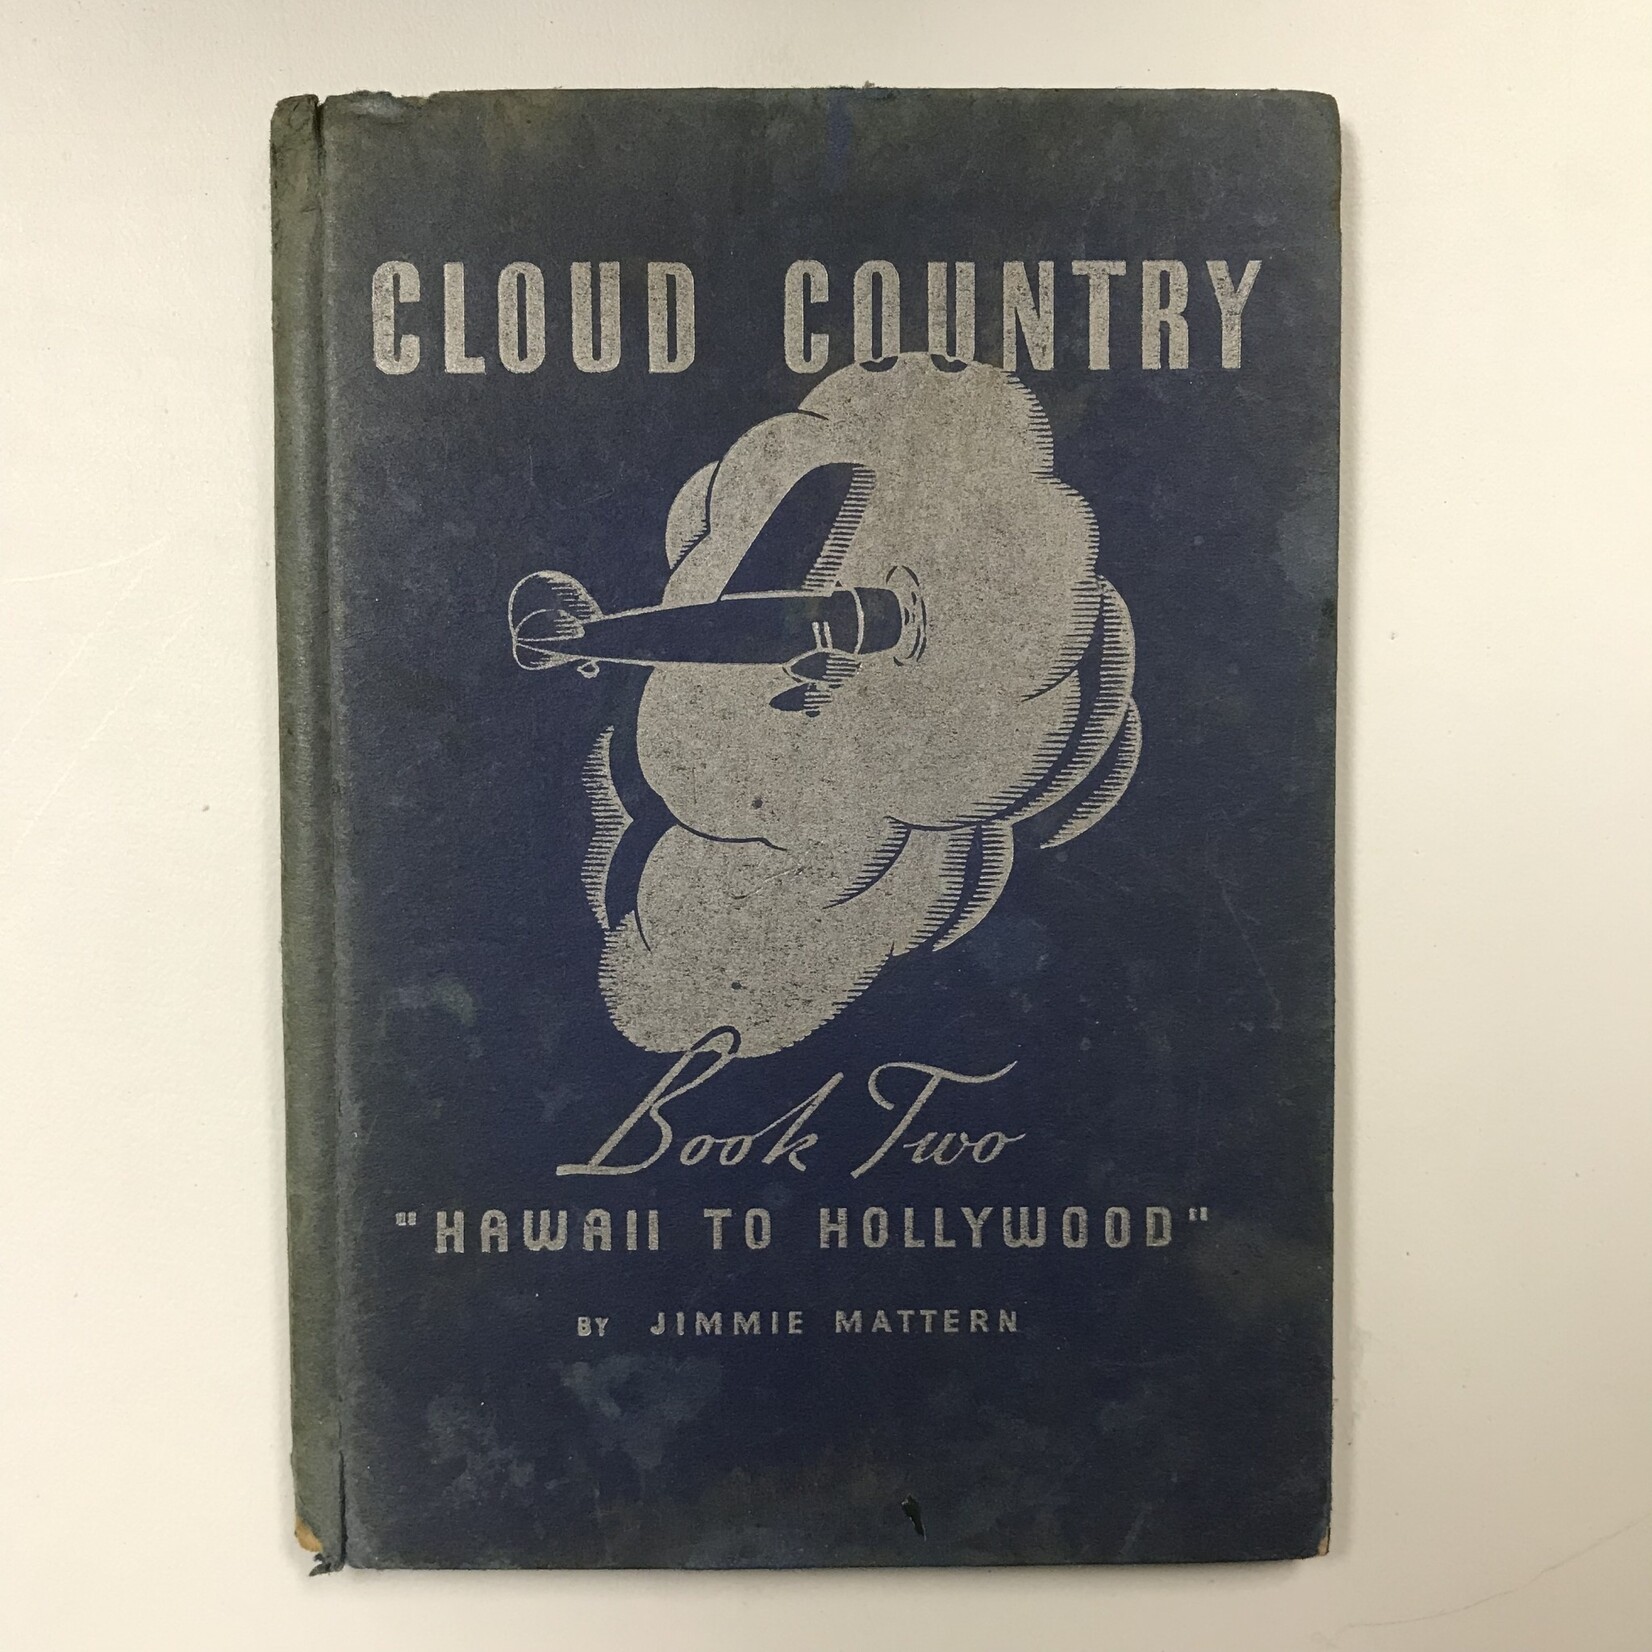 Jimmie Mattern - Cloud Country Book Two: Hawaii To Hollywood - Hardback (VINTAGE)